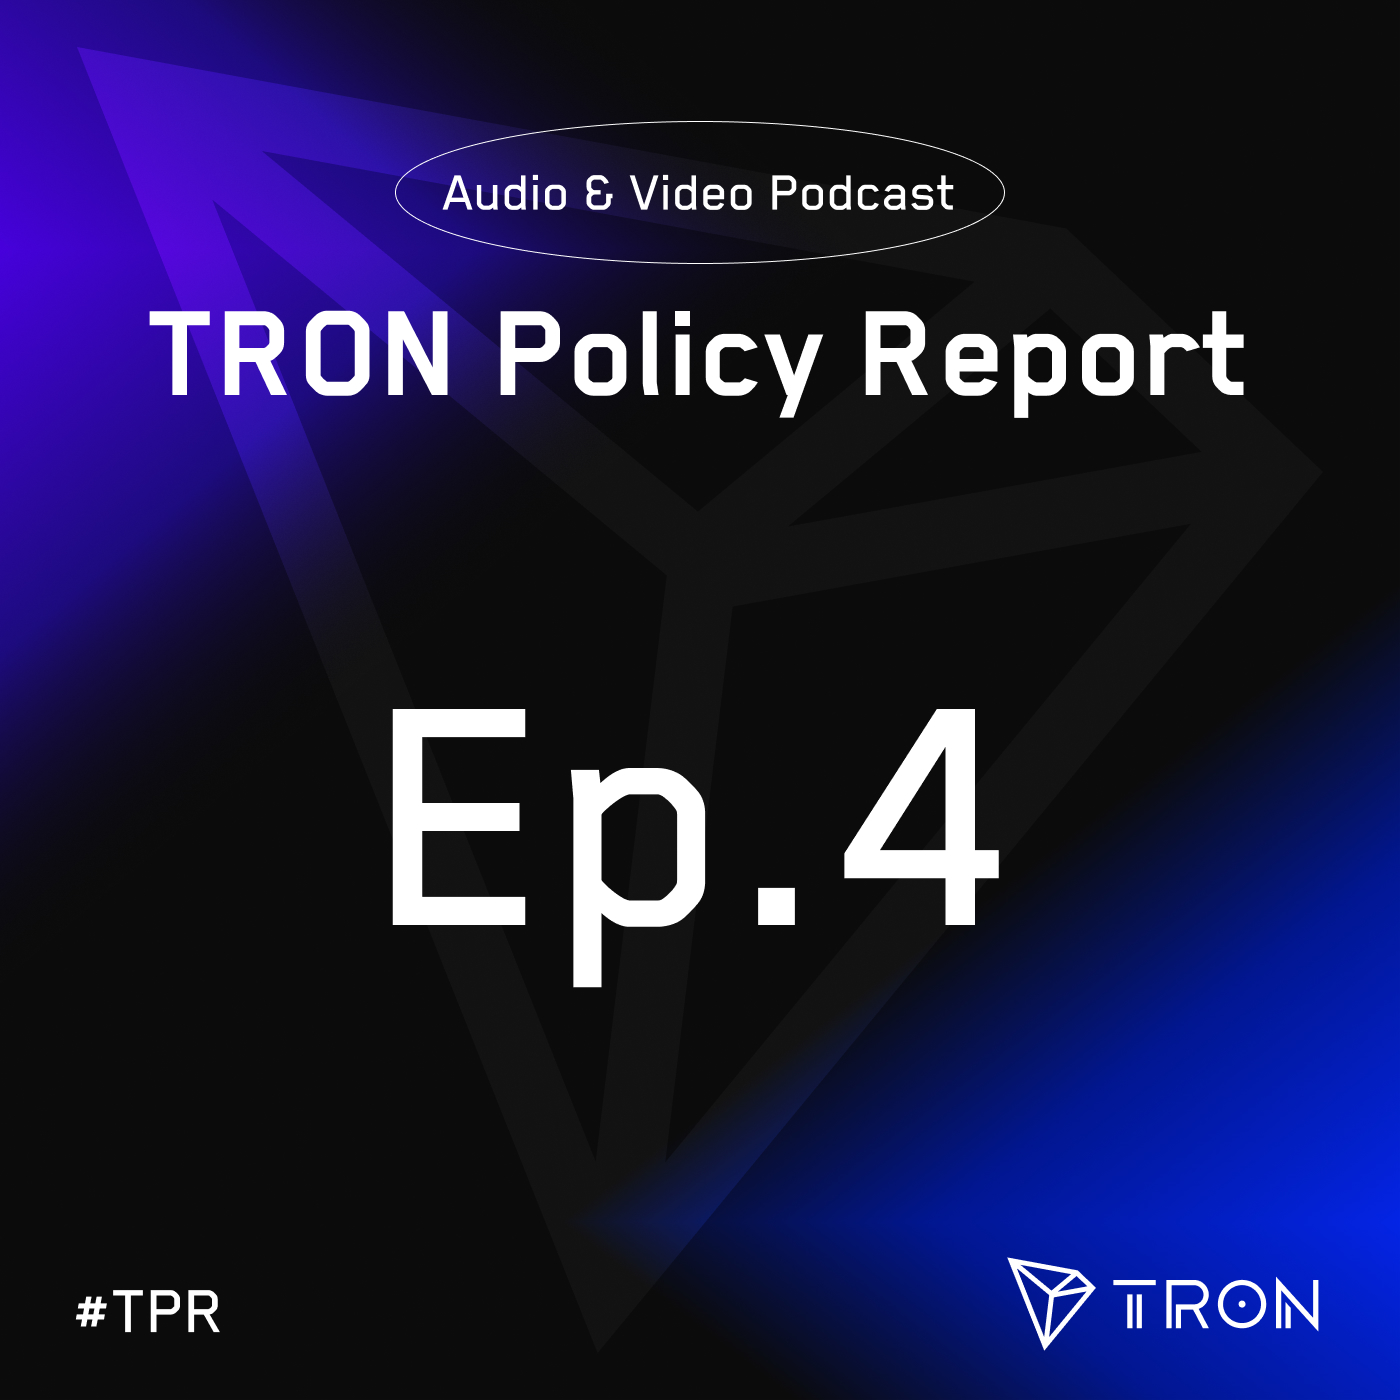 TPR Ep. 4 -Mike Frisch with Croke Fairchild Duarte & Beres discusses the Digital Assets Regulation Act of Illinois (DARA) and the cryptocurrency regulatory landscape at a State versus National level.